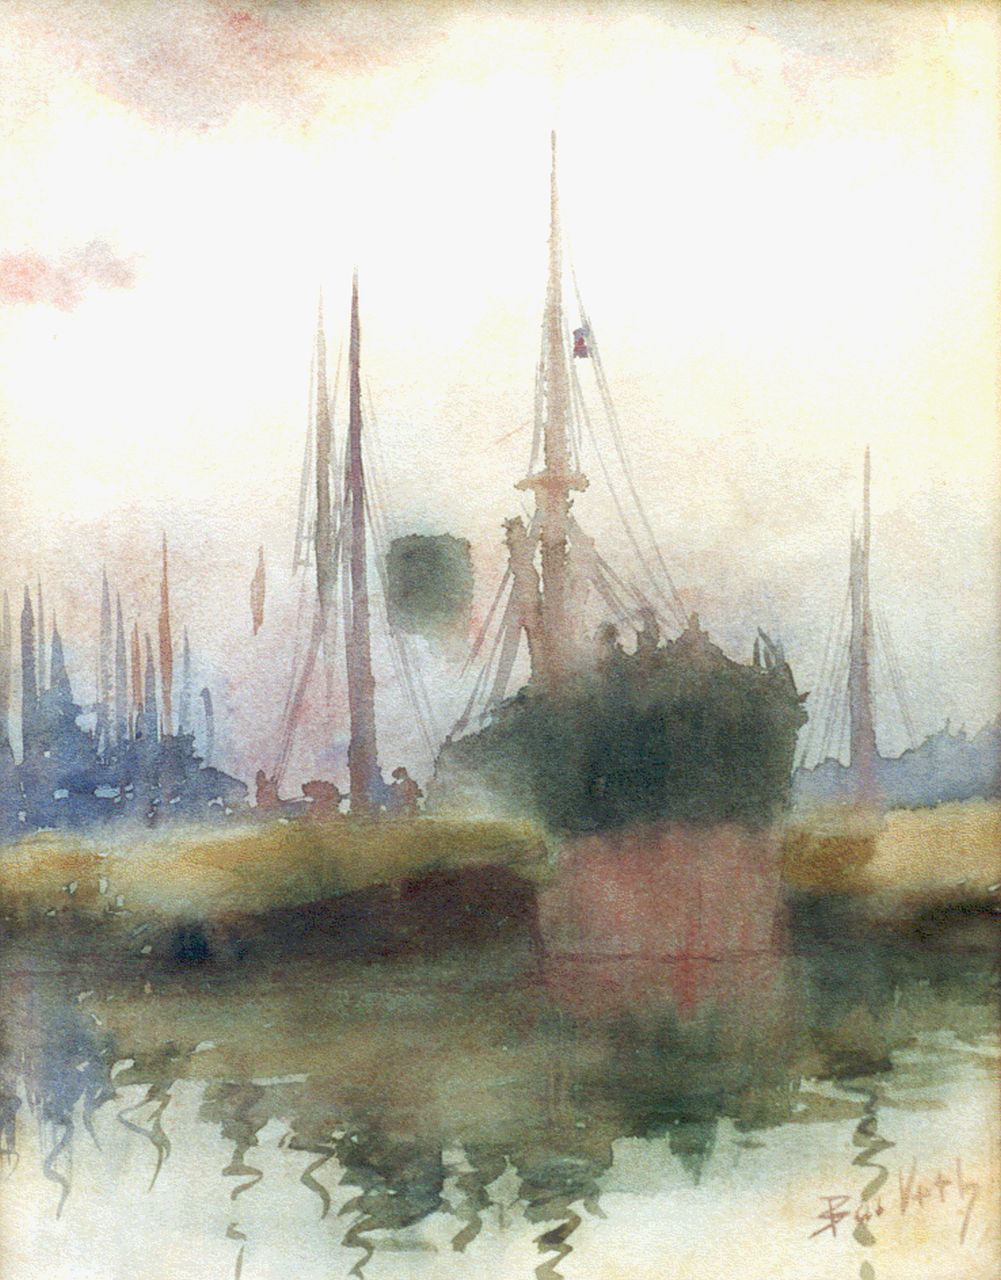 Veth B.  | Bastiaan 'Bas' Veth, A harbour view, Aquarell auf Papier 36,0 x 28,0 cm, signed l.r. und dated on the reverse '91